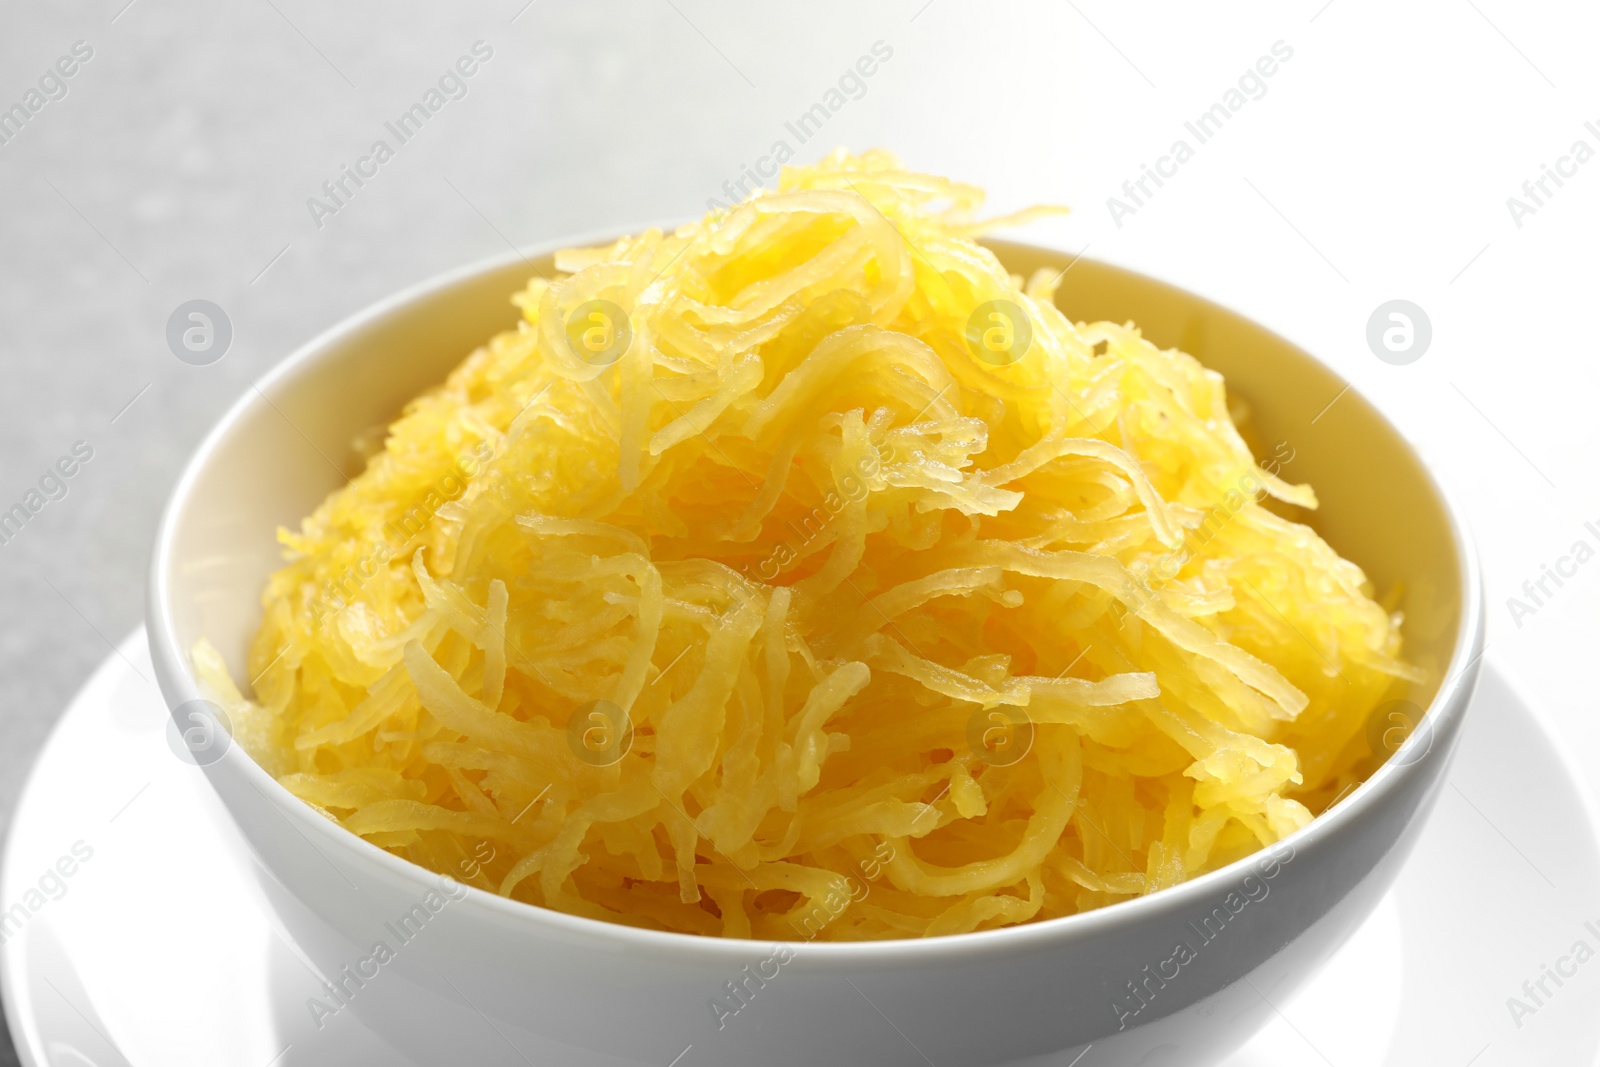 Photo of Bowl with cooked spaghetti squash on grey background, closeup